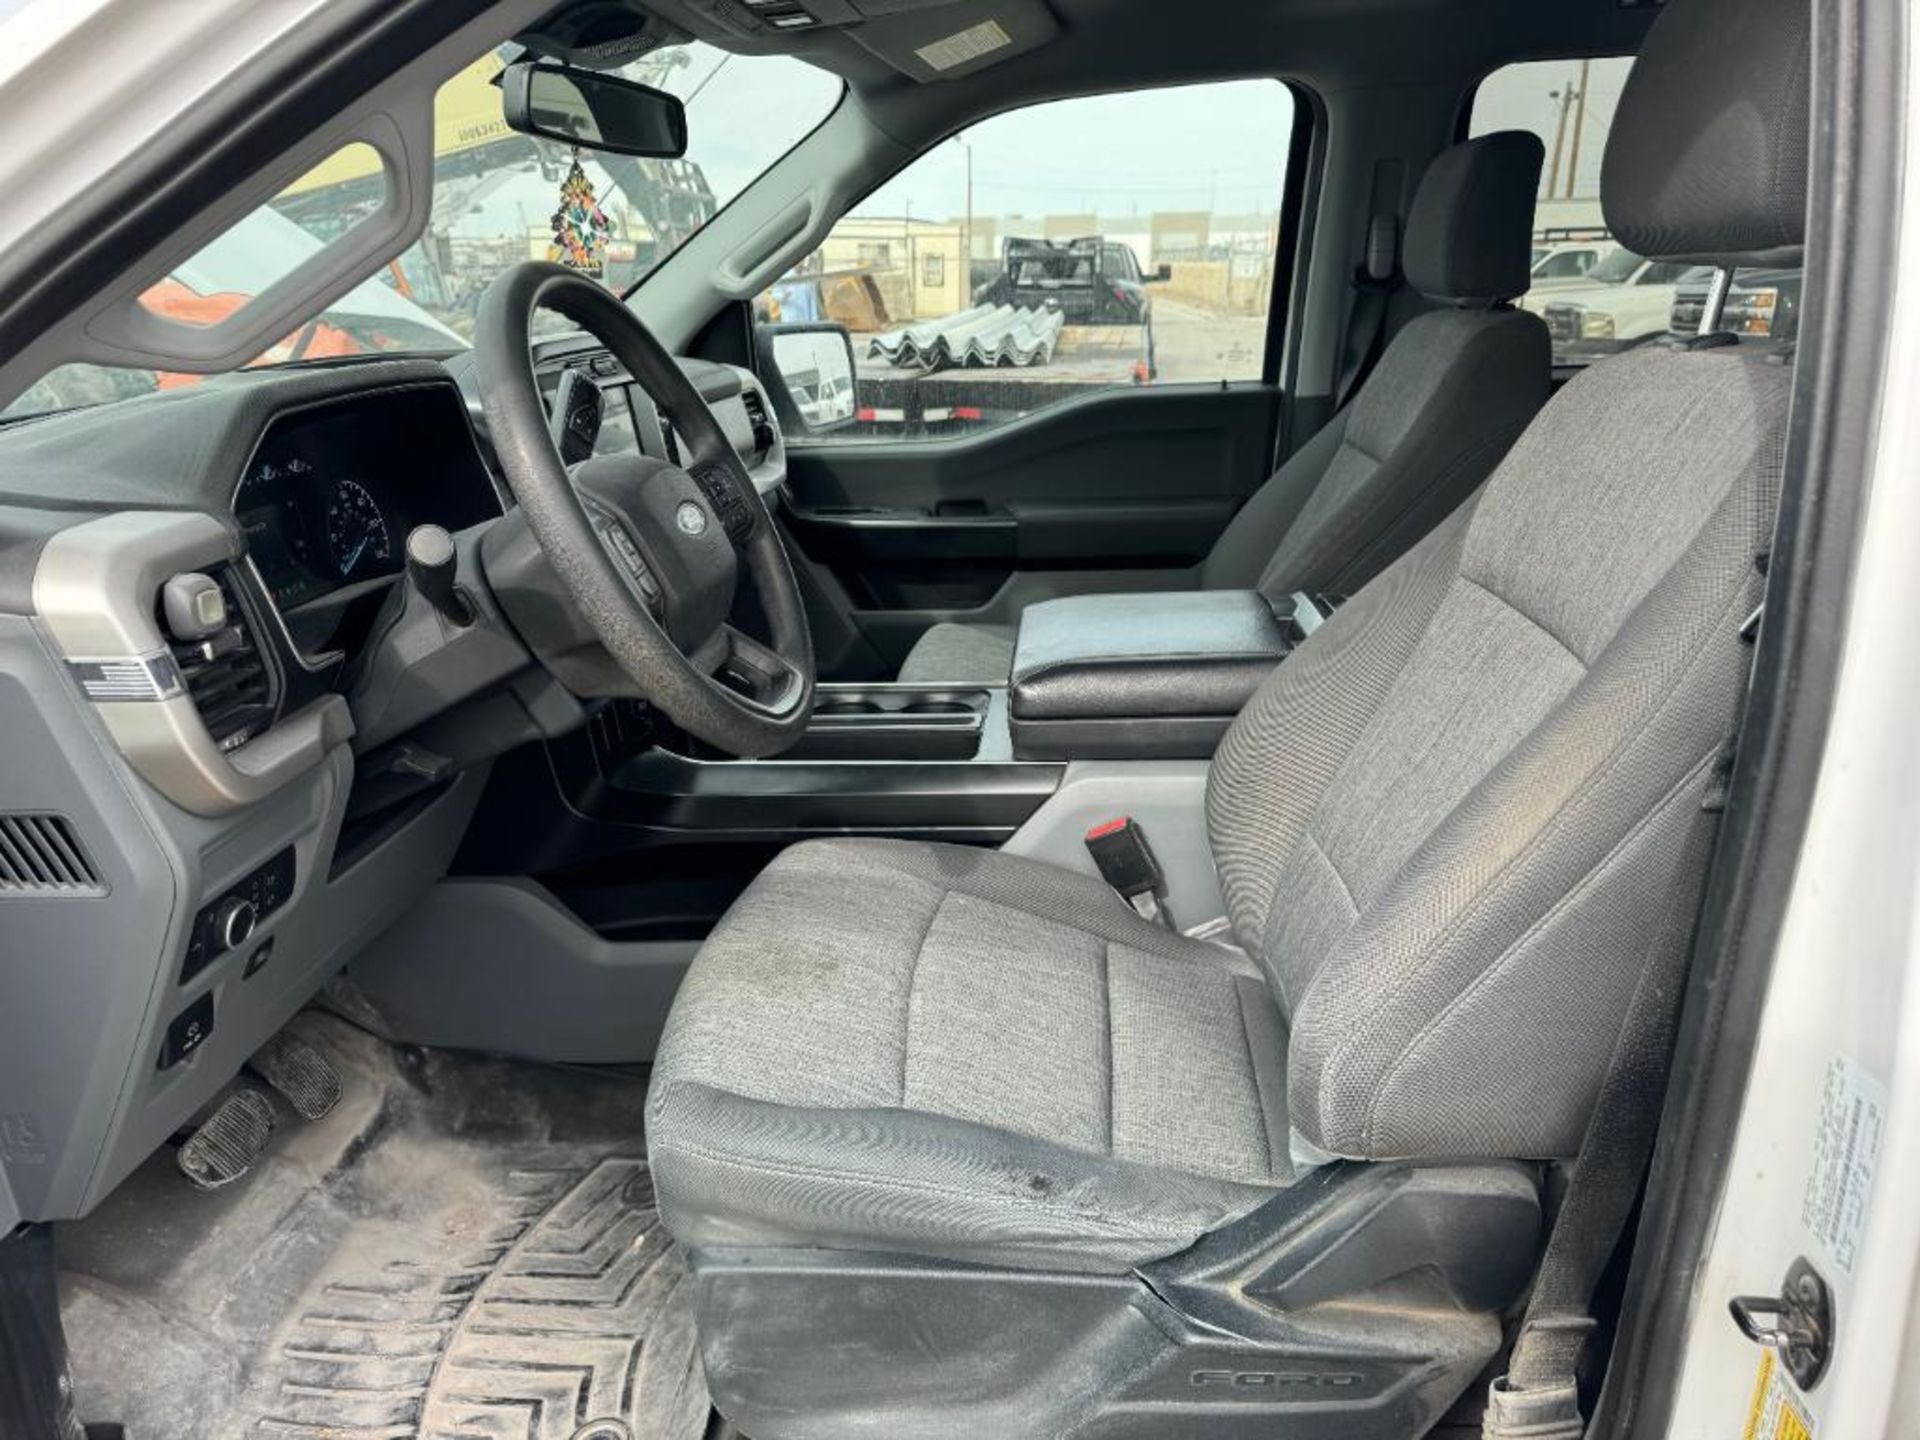 2021 Ford F150 XL Crew Cab 4X4 Truck - Image 12 of 19